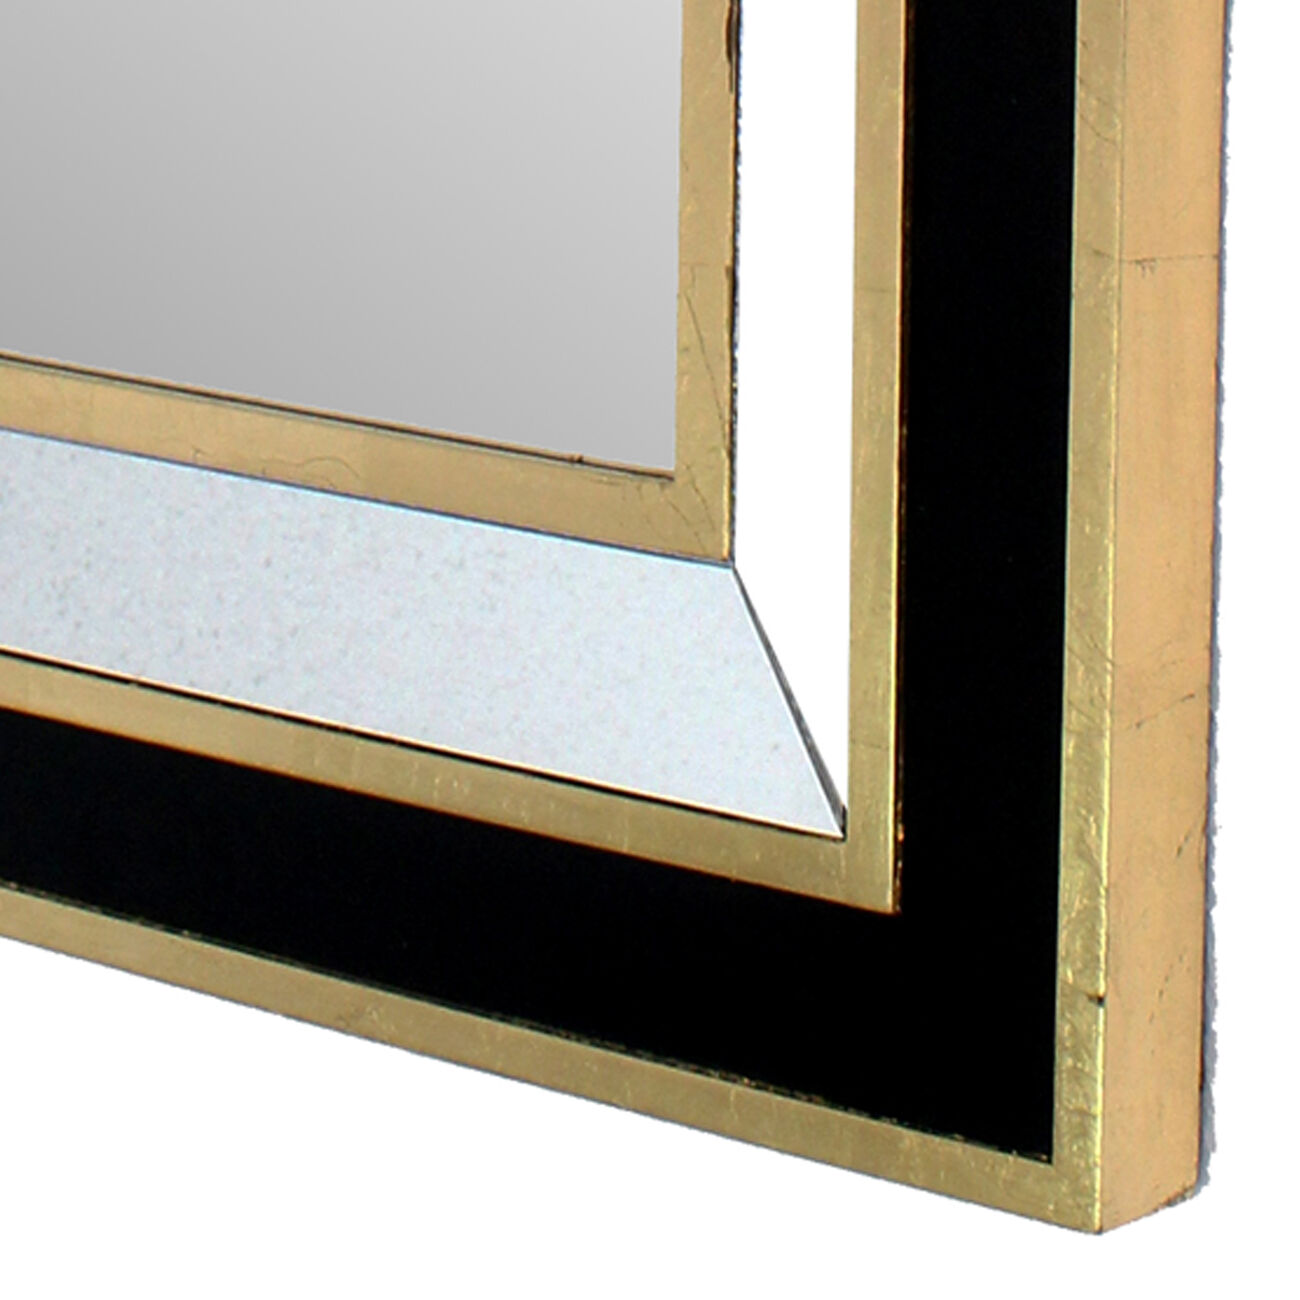 Rectangular Wooden Dressing Mirror with Beveled Edges, Black and Gold